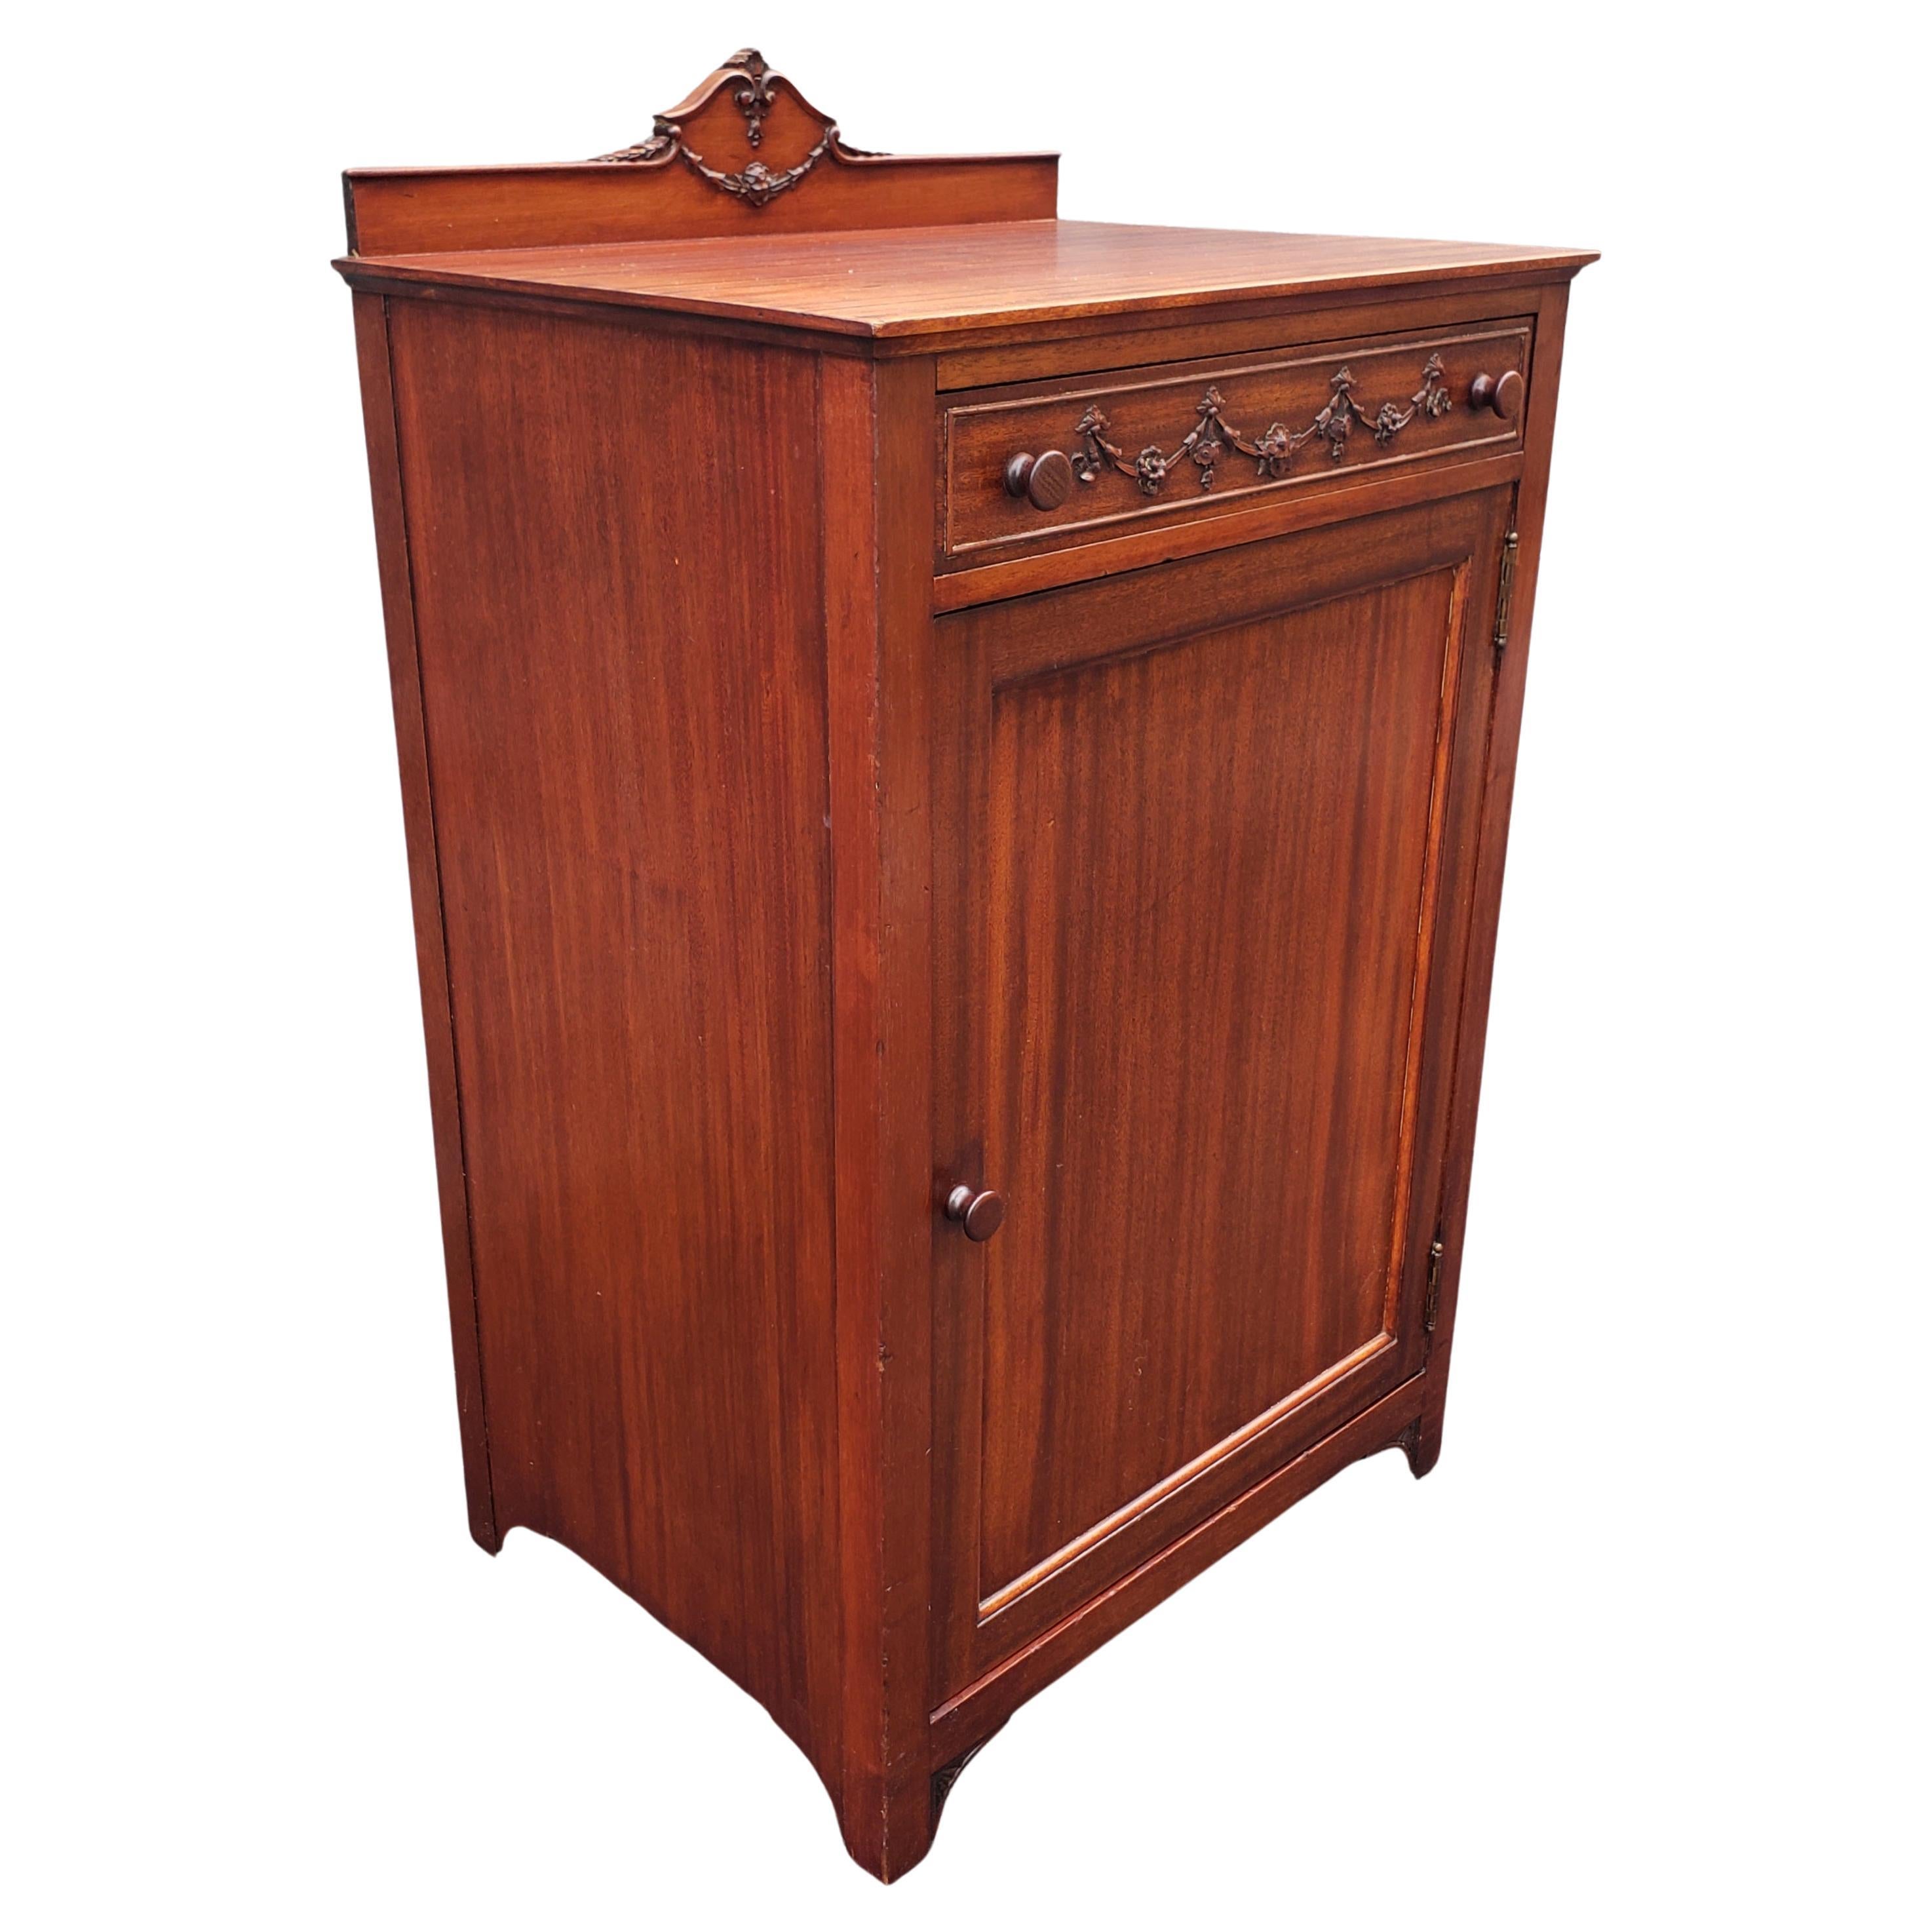 Victorian 19th Century Robert J. Horner and Co. Solid Carved Mahogany Sheet Music Cabinet For Sale